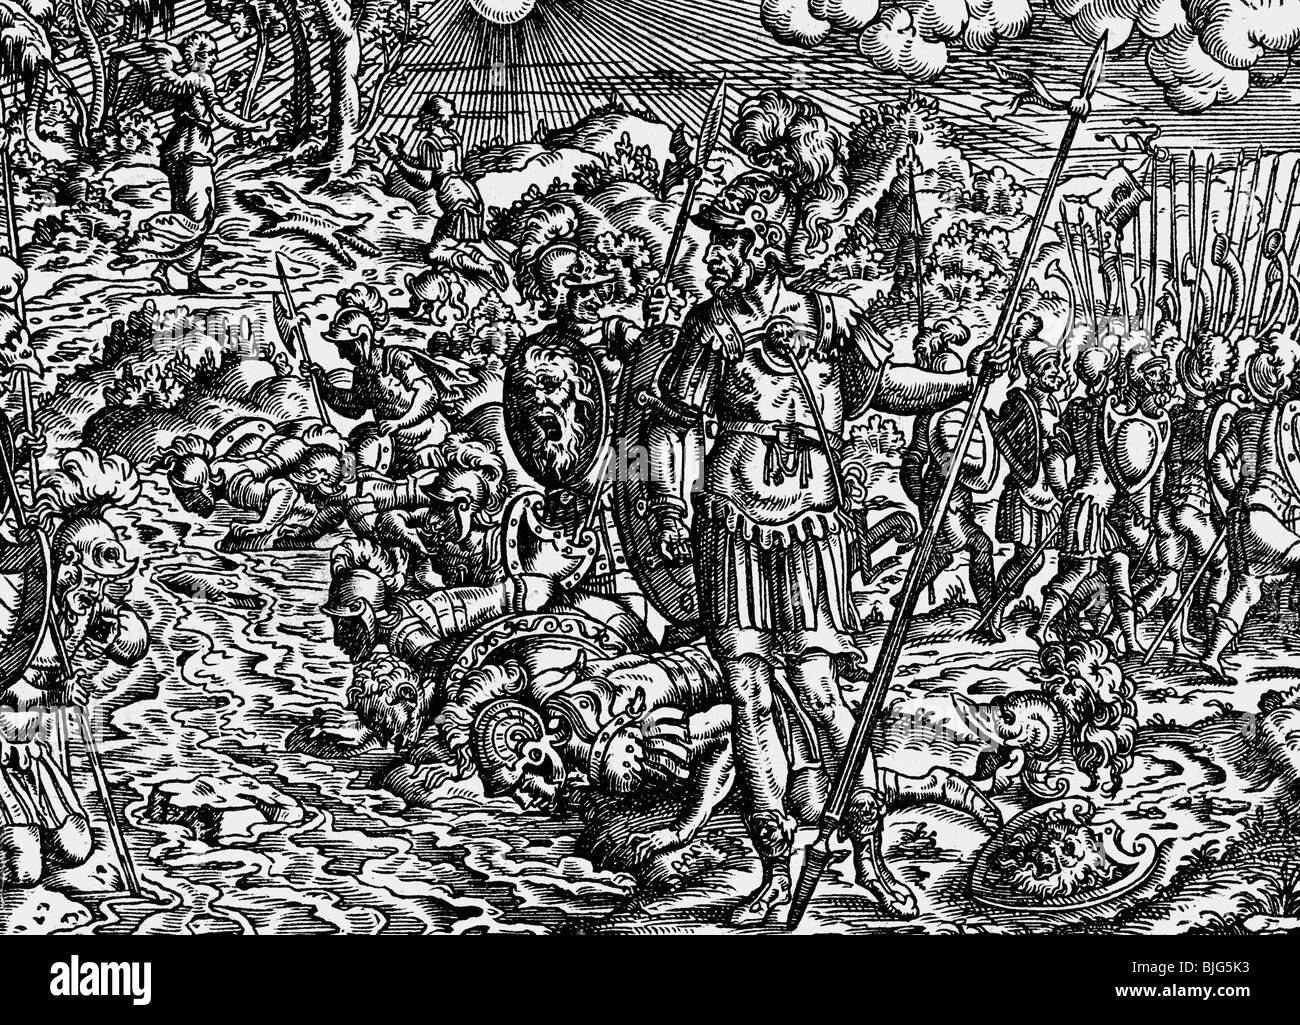 fine arts, Amman, Jost (1539-1591), woodcut, 15.5. cm x 11 cm, illustration from the bible, printed by Sigmund Feyerabend, Frankfurt on the Main, Germany, 1564, Artist's Copyright has not to be cleared Stock Photo